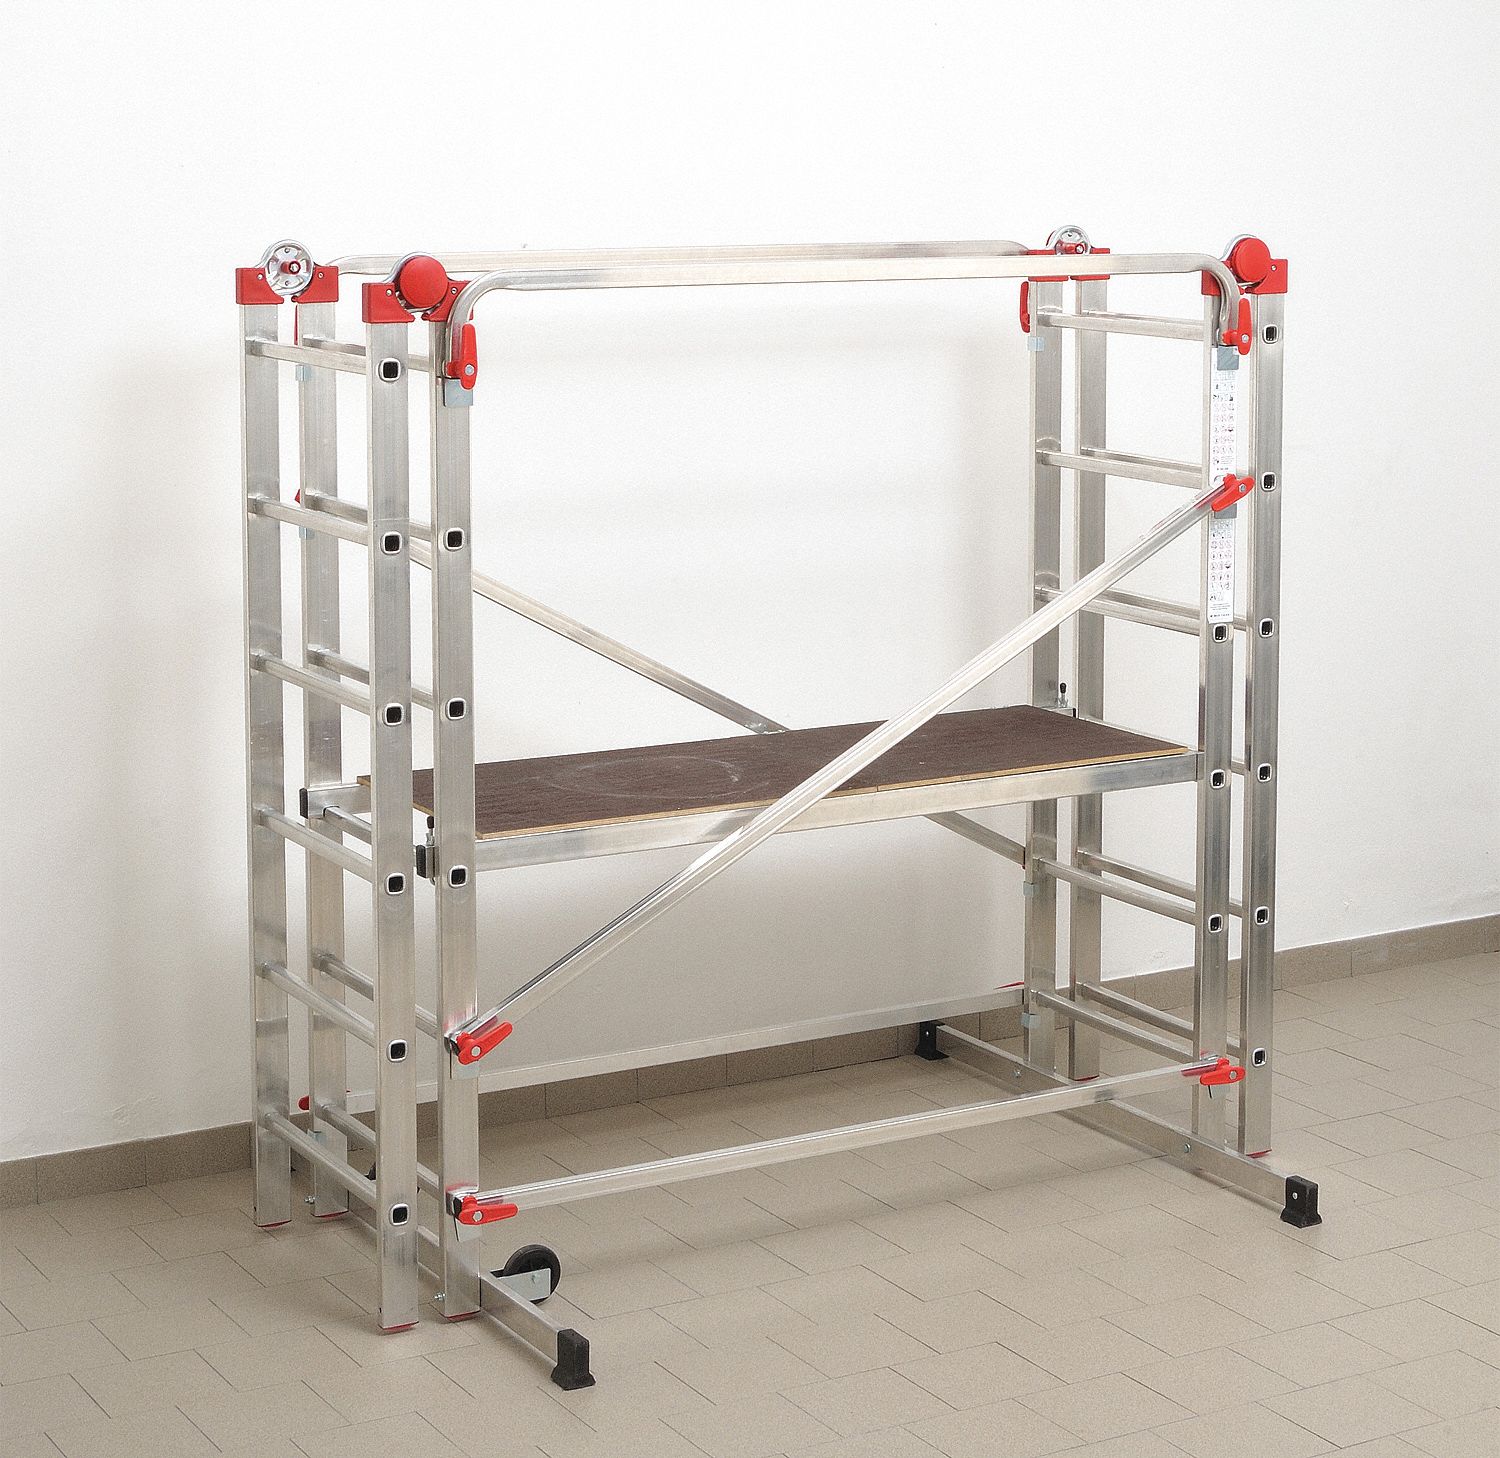 Portable Scaffold: 7 ft 6 in Platform Ht, 5 ft 6 in Overall Ht, 13 3/8 in Overall Dp